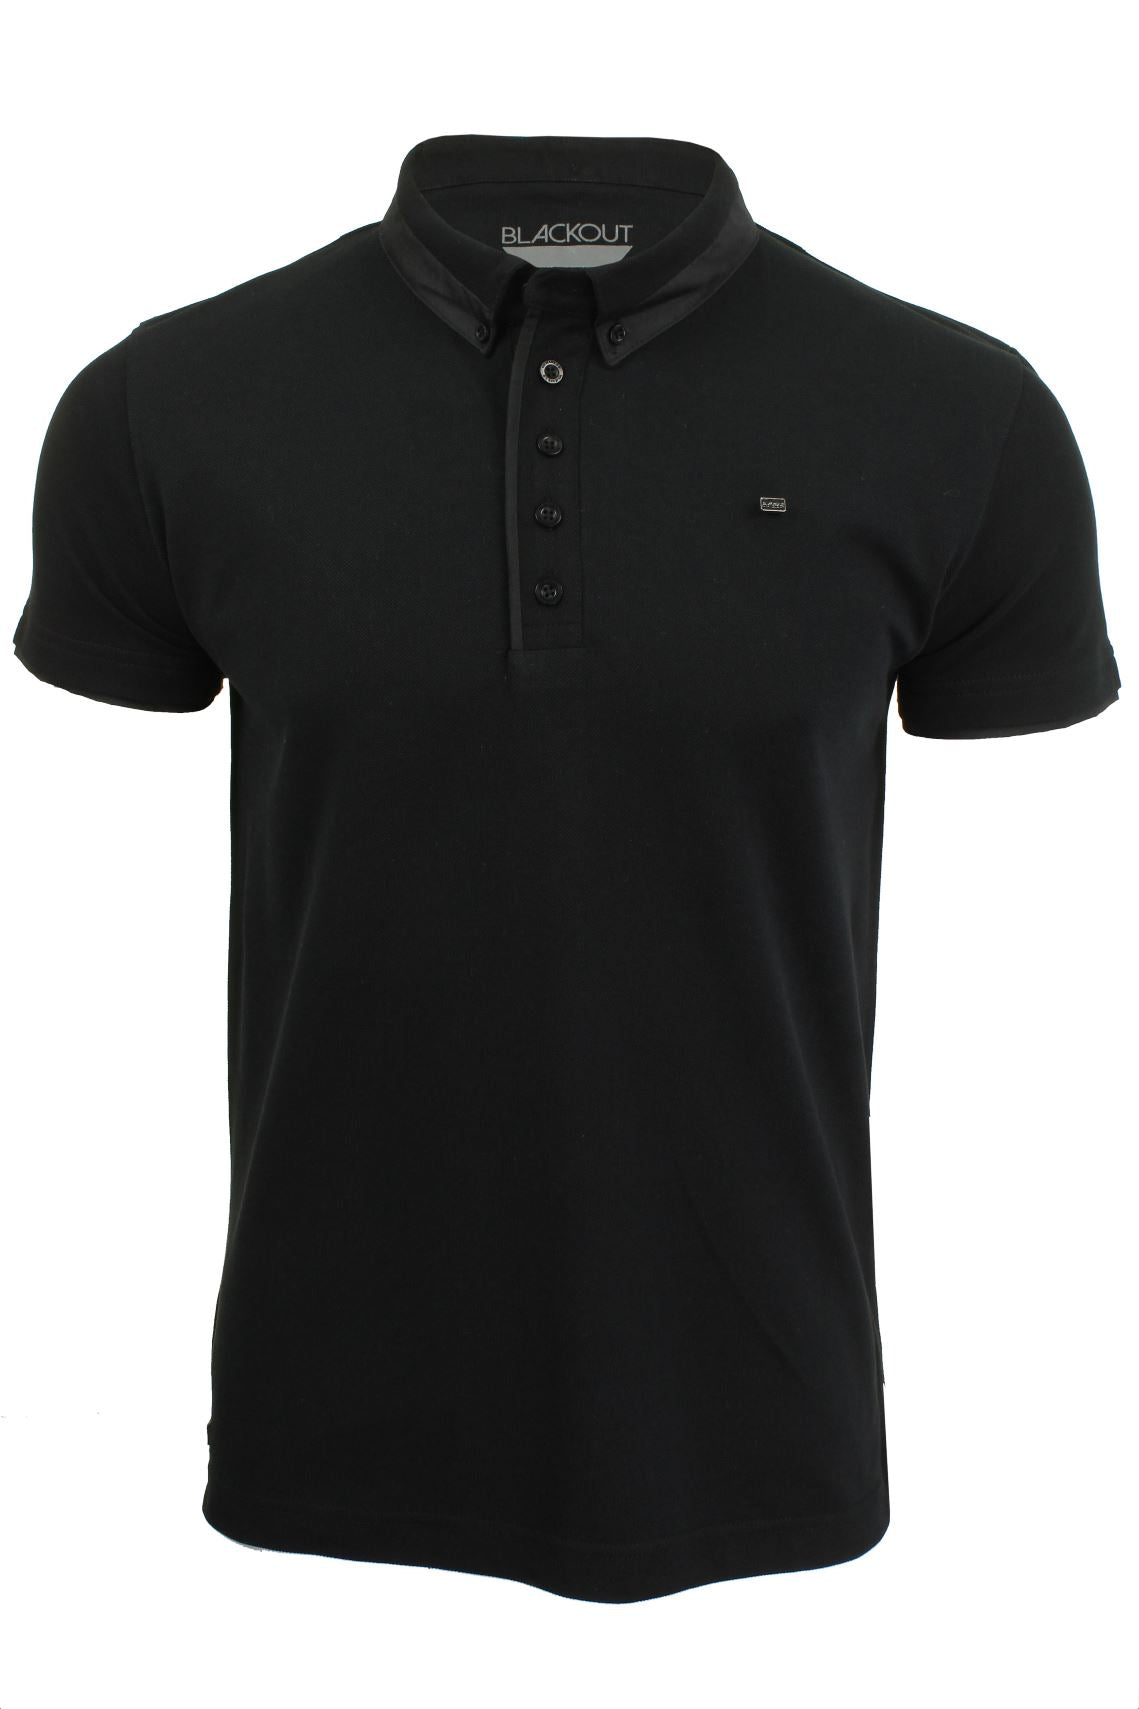 Mens Short Sleeved Polo Shirt from the Blackout Collection by Voi Jeans, 01, Dubb, Mullen - Black